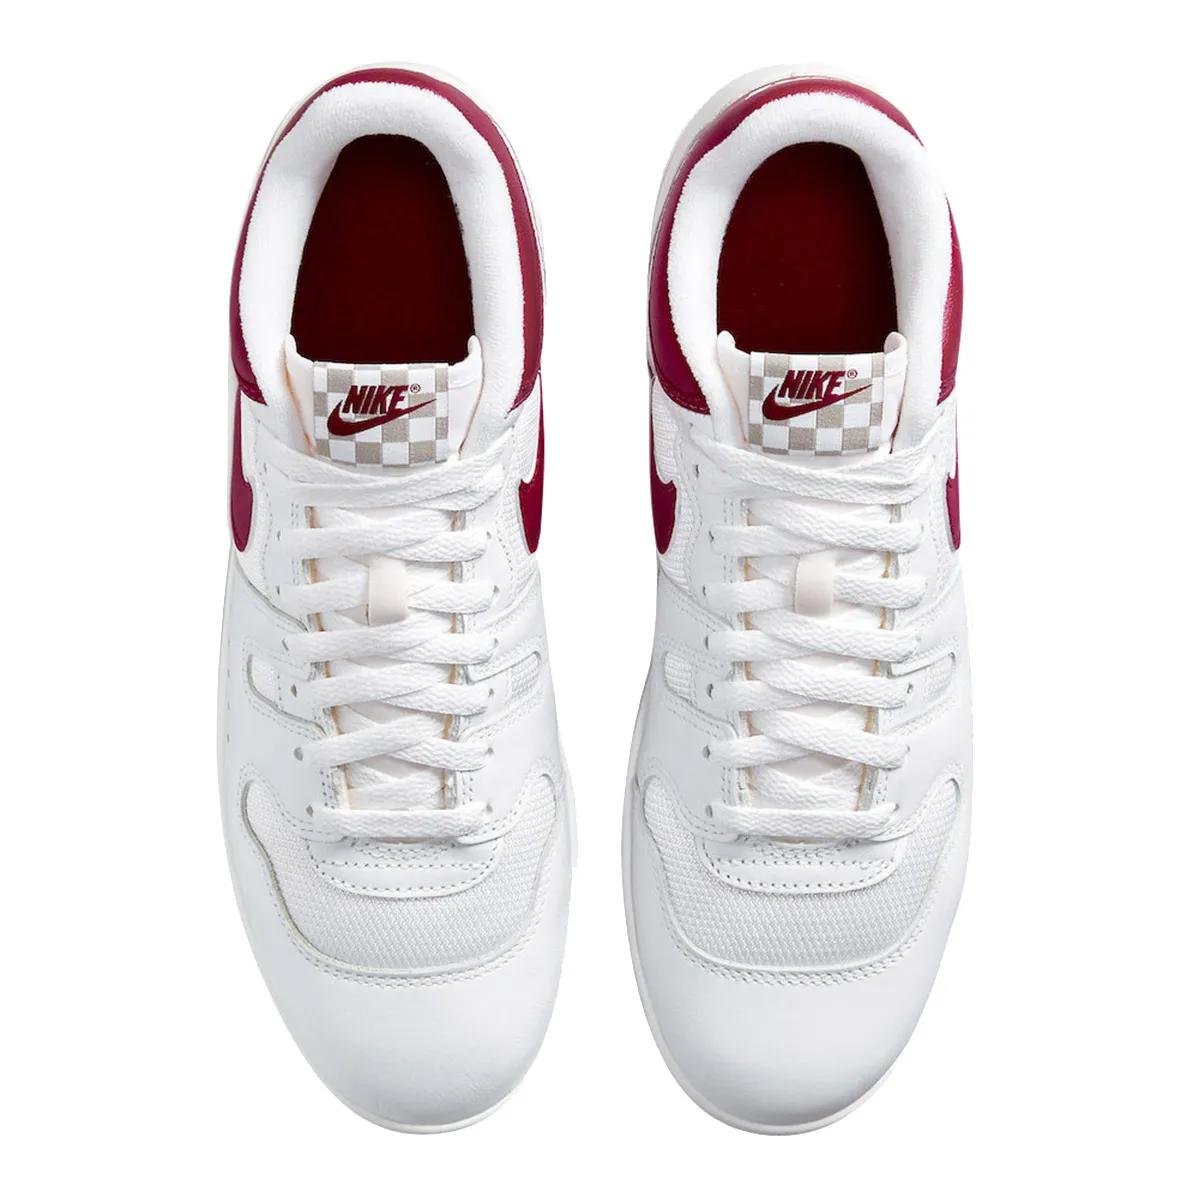 NIKE NIKE ATTACK QS SP 